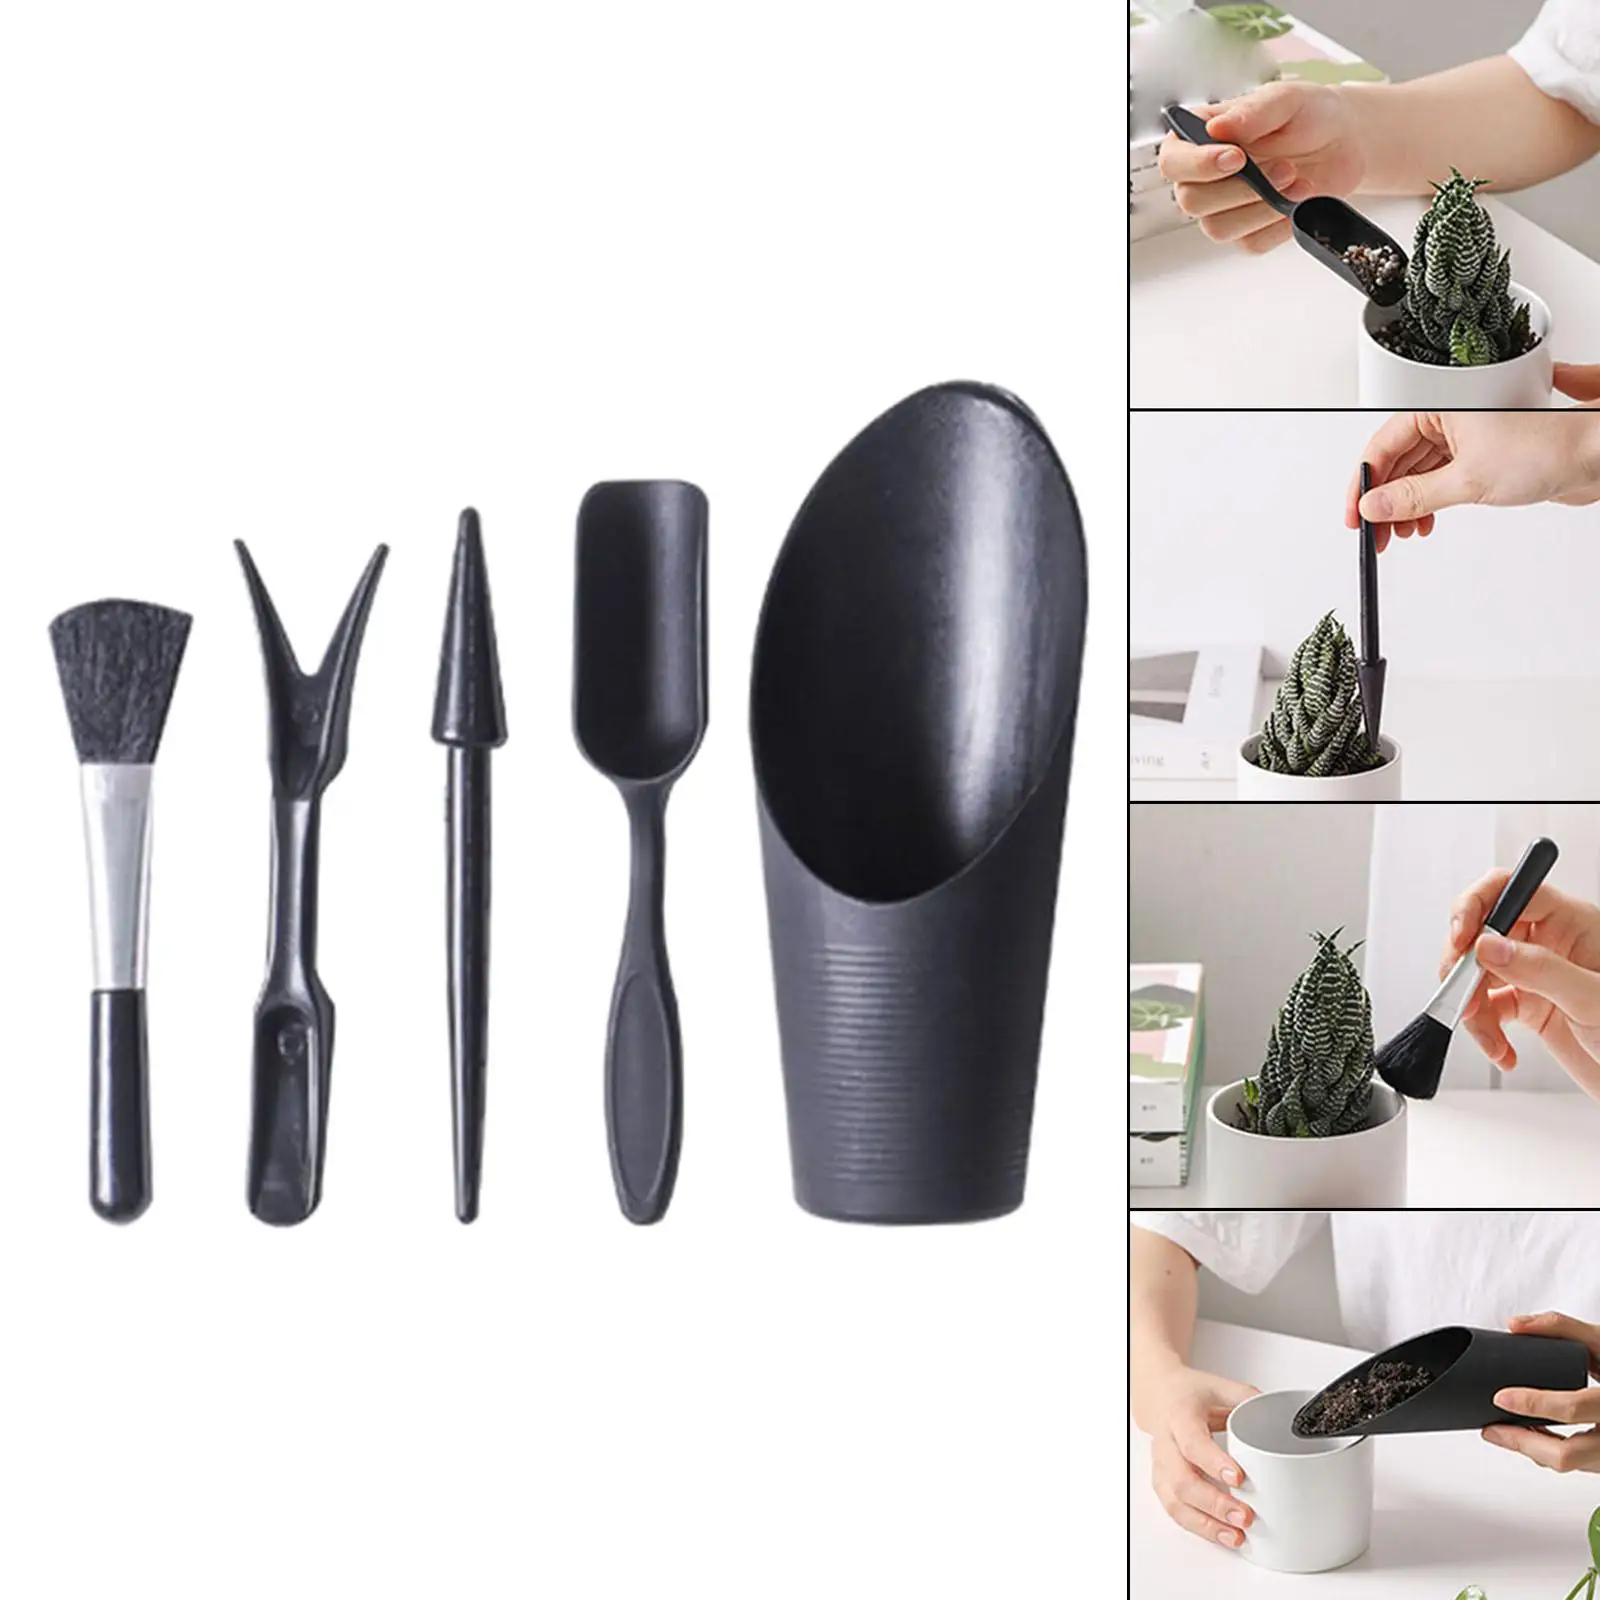 Succulent Hand Transplanting Tools set of 5Pcs for Cactus, Houseplant, Bonsai Tools Durable Accessories Easy to Carry